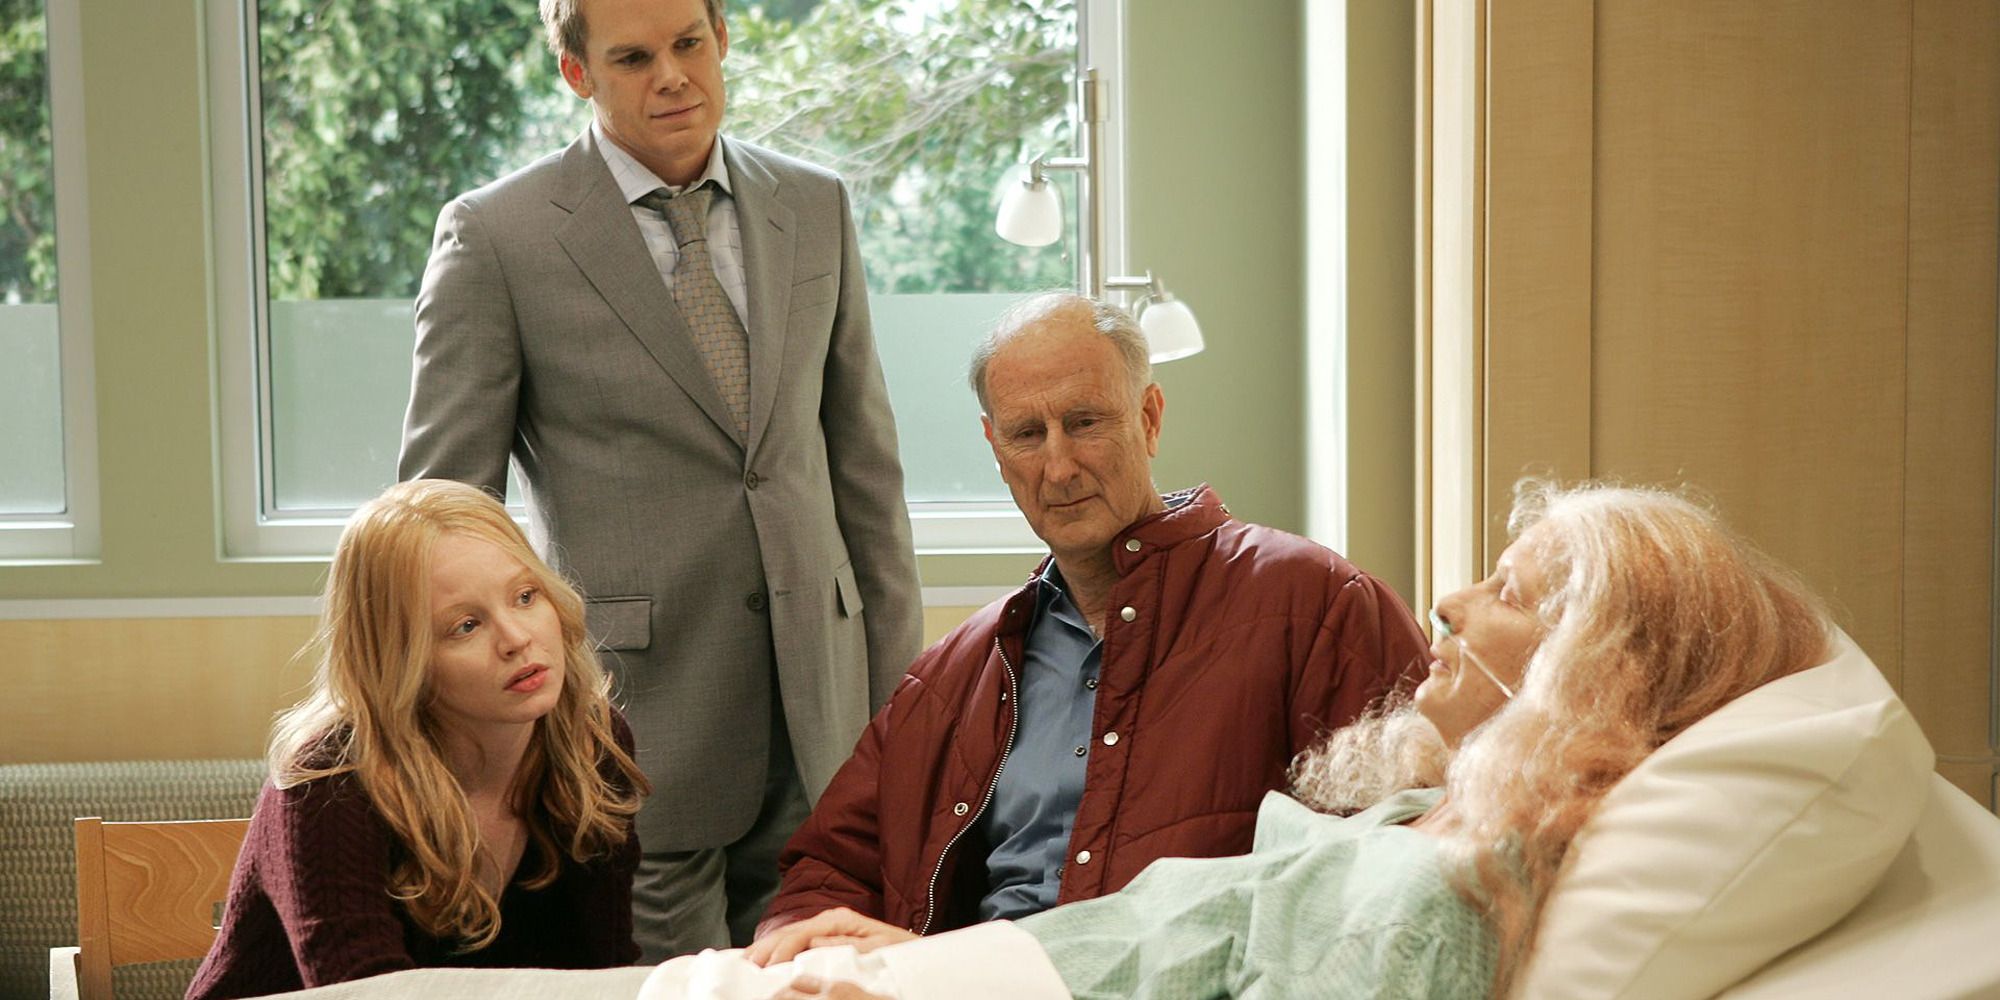 The cast of 'Six Feet Under' next to an old woman in a hospital bed